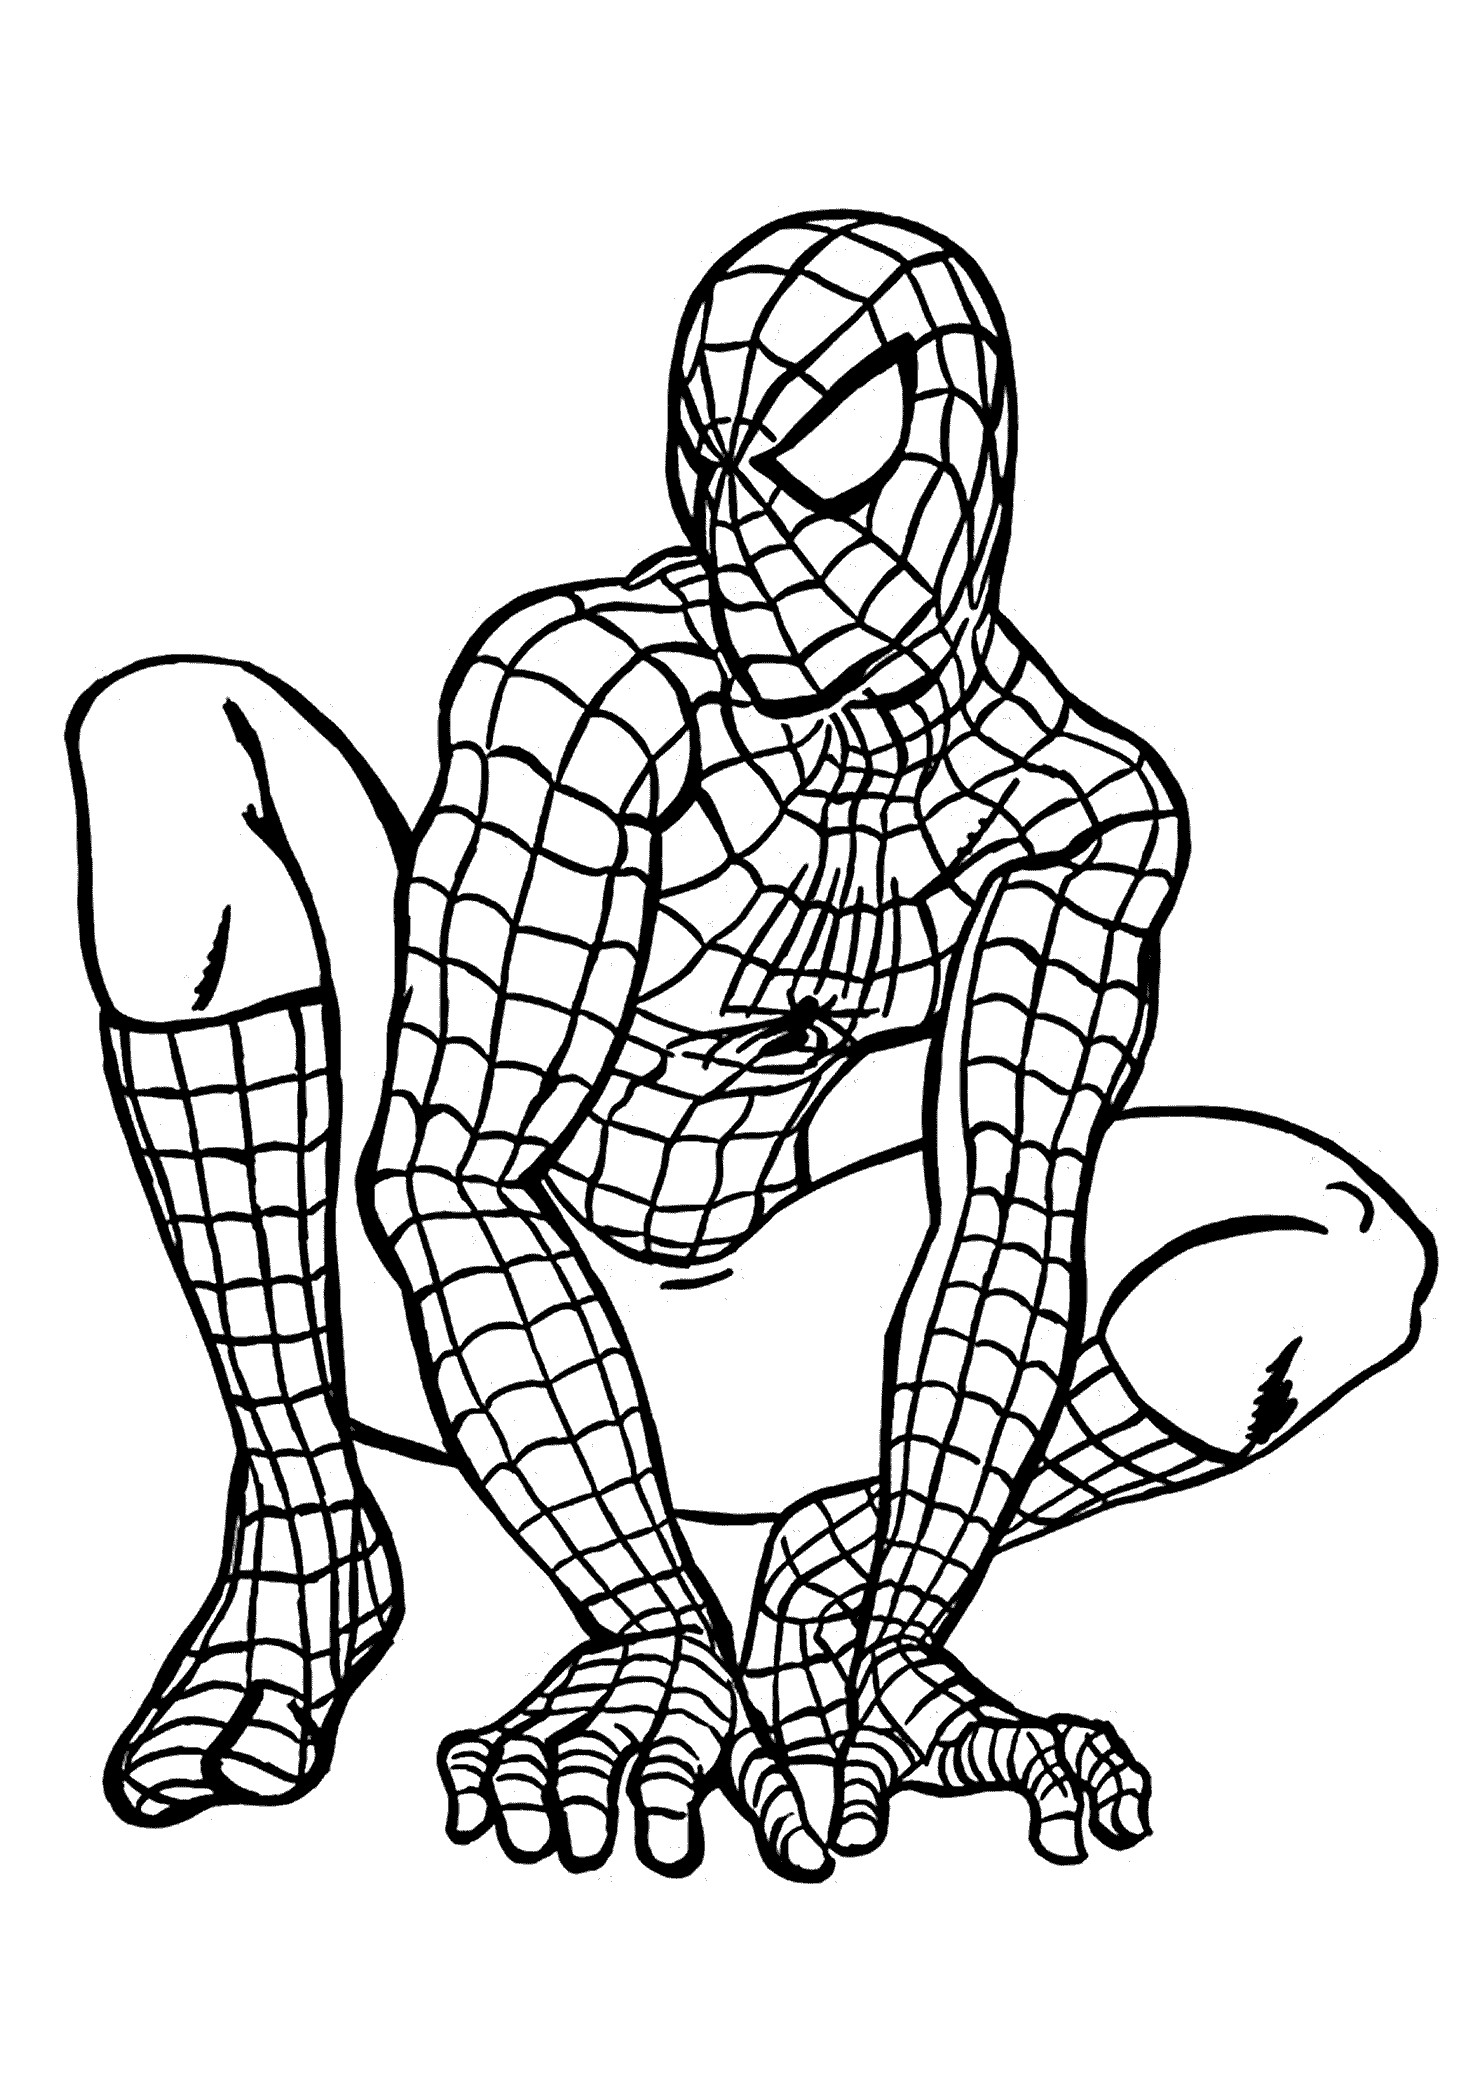 Coloring Sheets For Boys Spiderman
 Spider man coloring pages for kids printable free